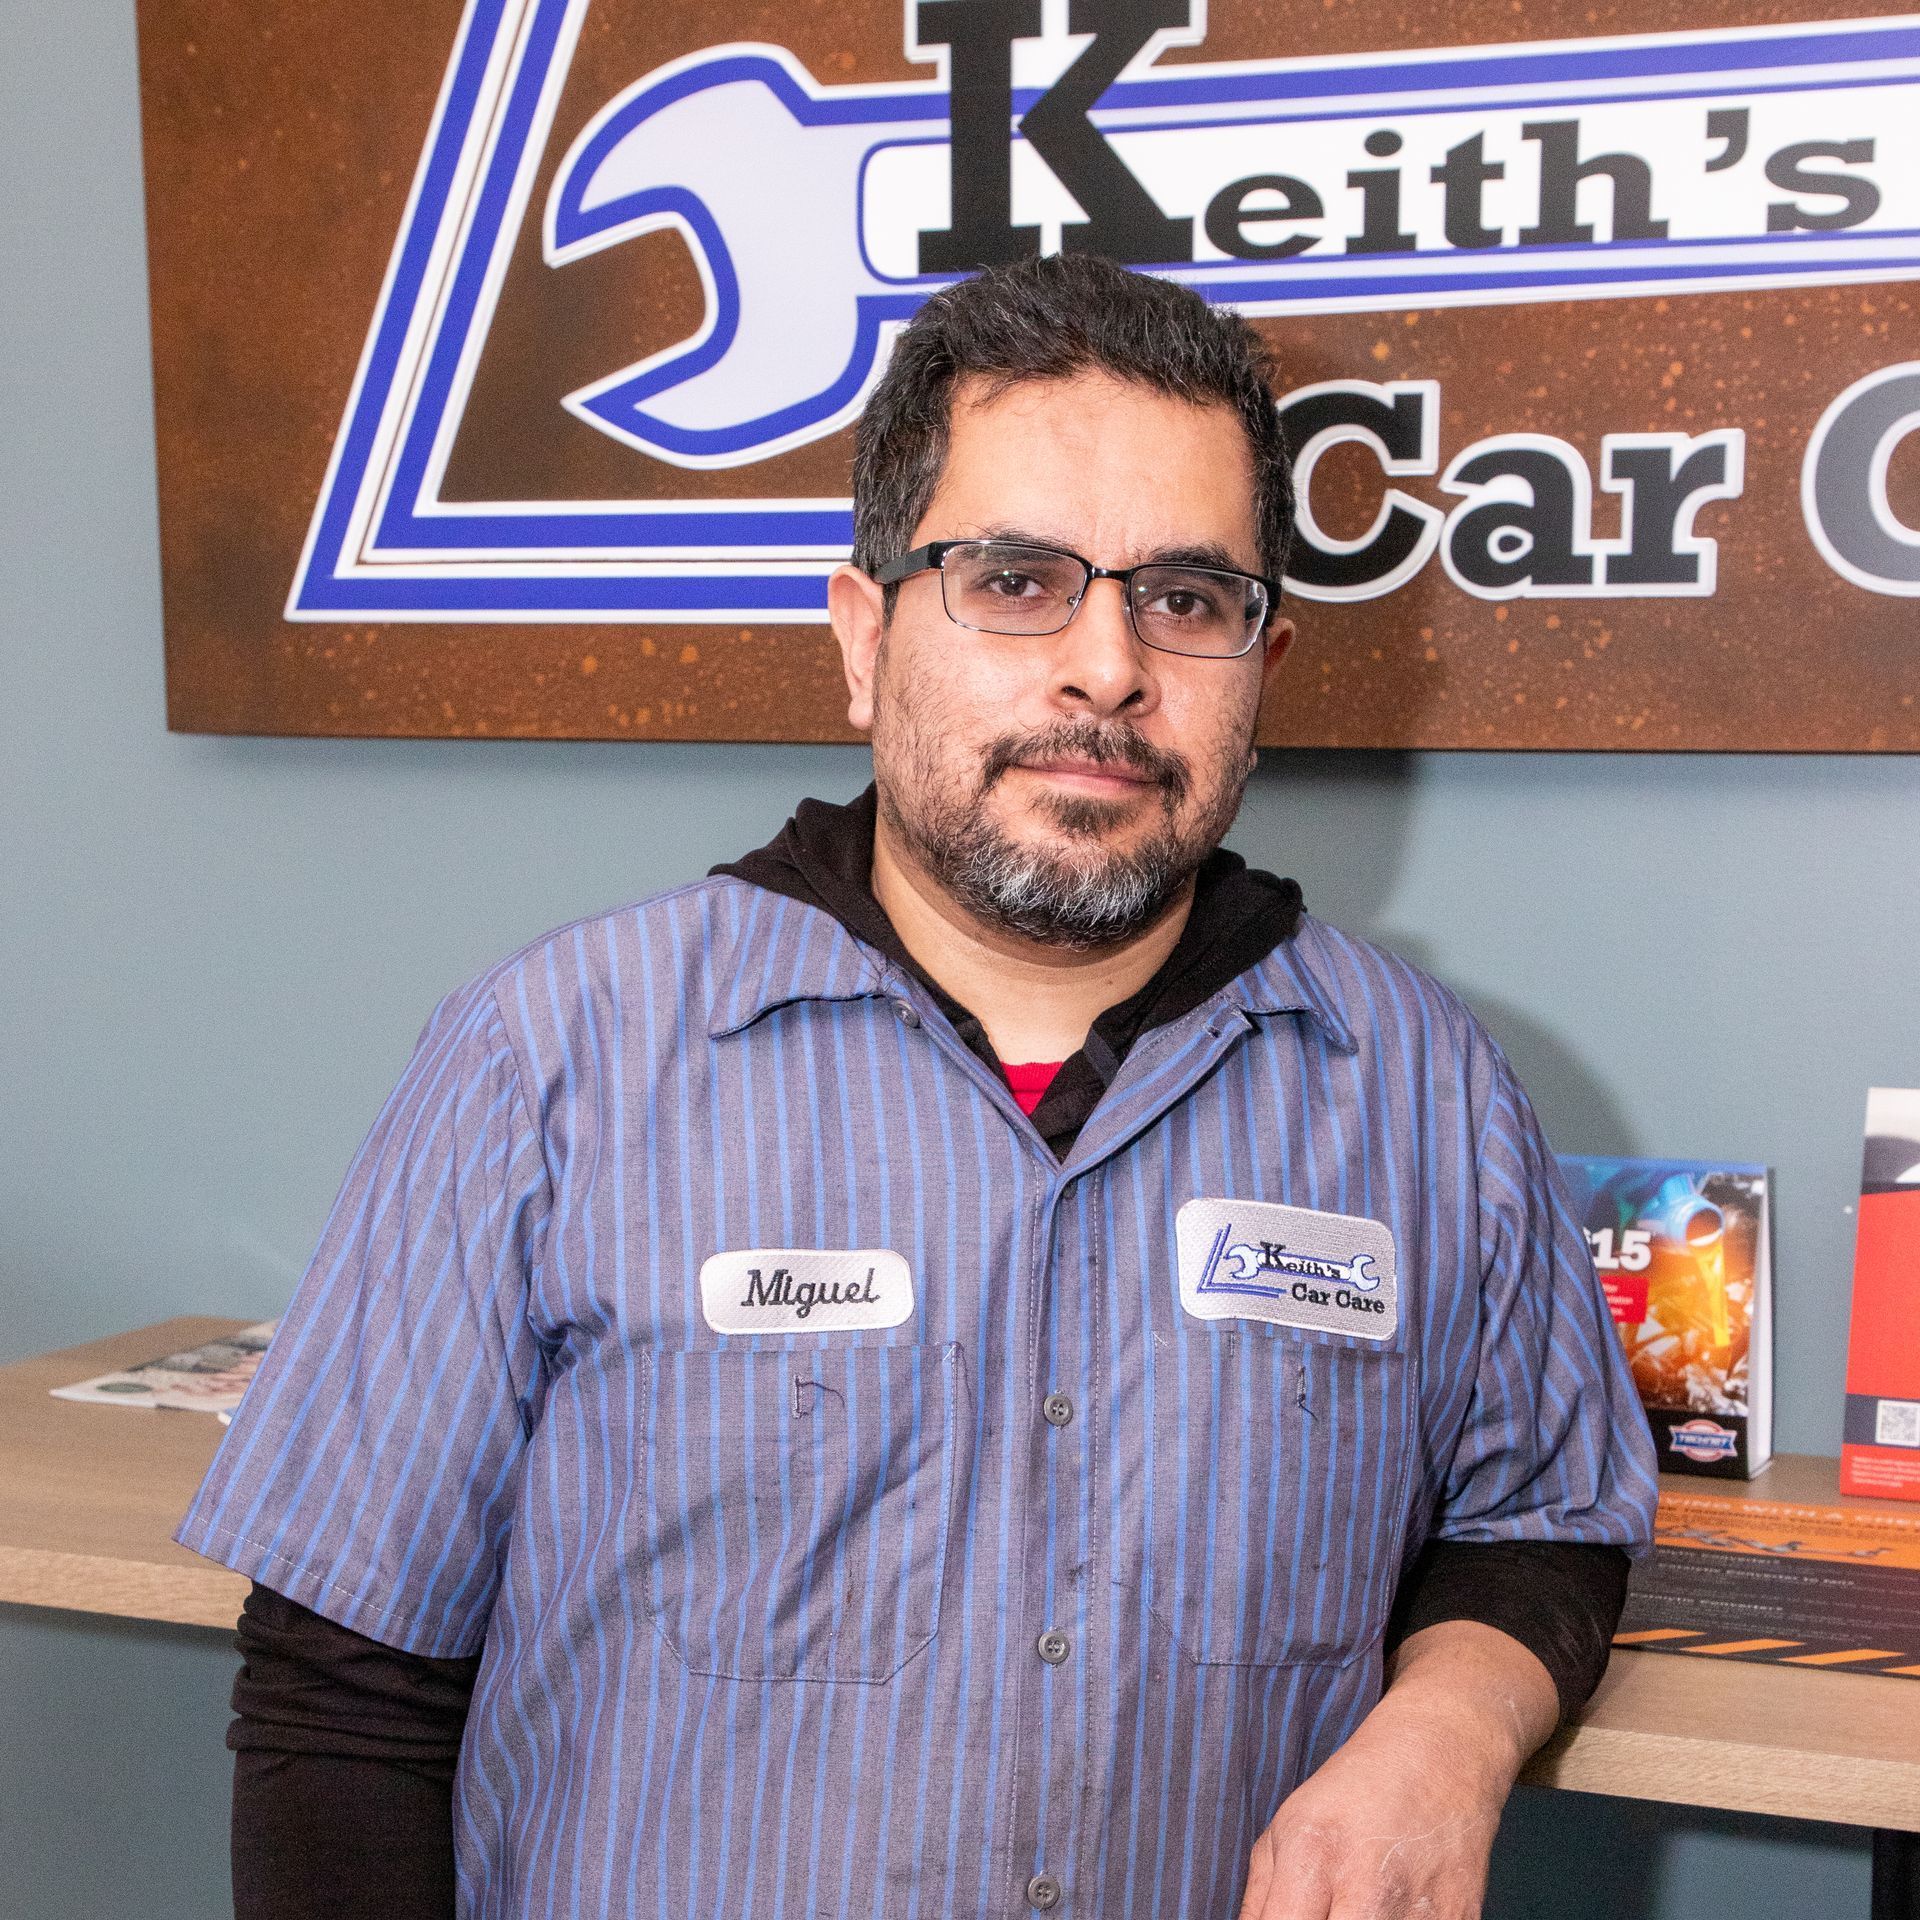 Miguel C at Keith's Car Care in Oswego, IL